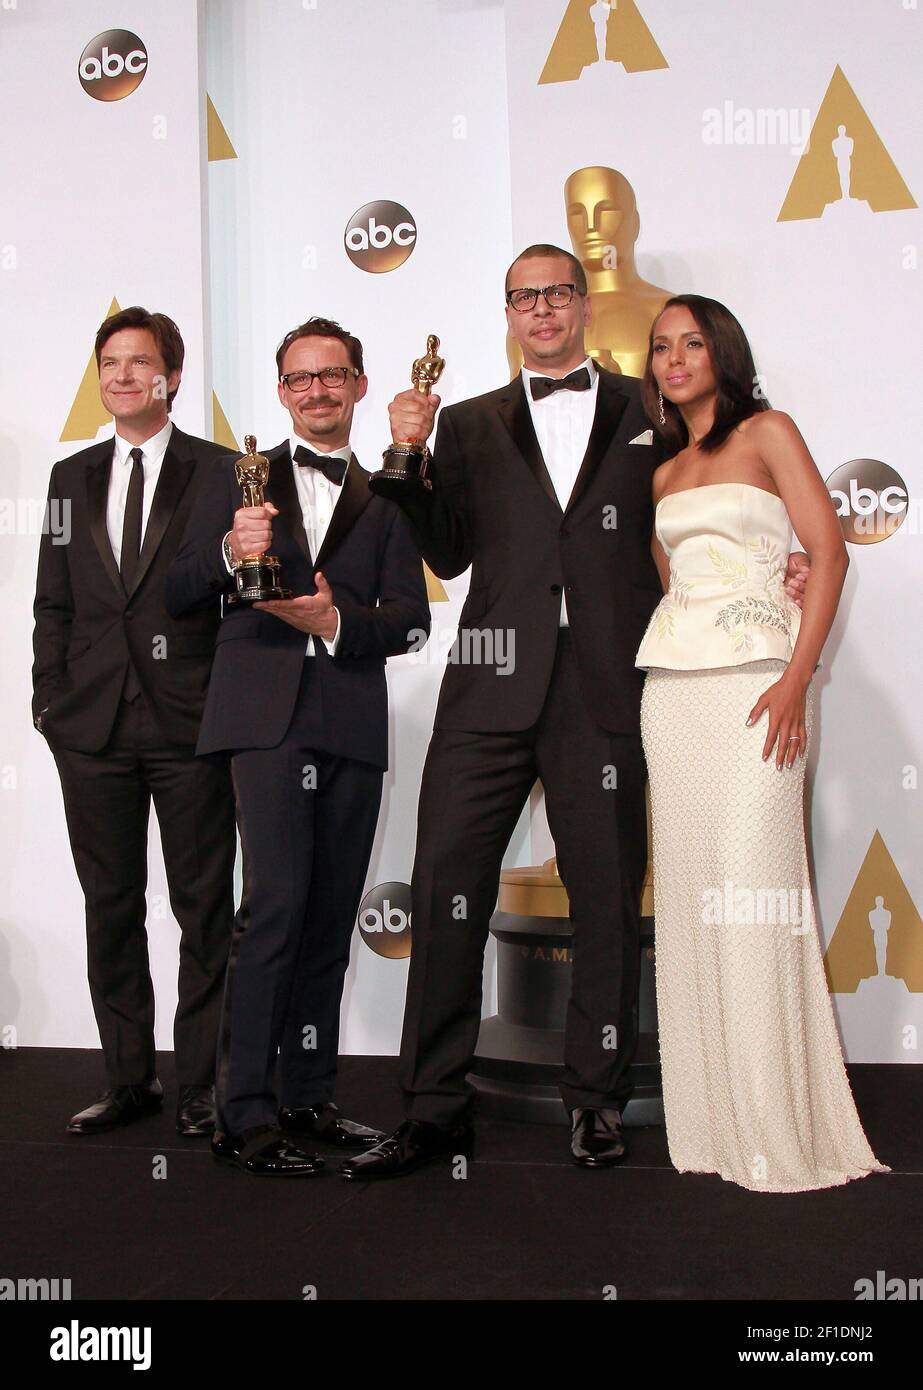 22 February 2015 - Hollywood, California - Actor Jason Bateman, James Lucas and Mat Kirkby winners of the Best Live Action Short Film Award for 'The Phone Call', and actress Kerry Washington pose in the press room during the 87th Annual Academy Awards presented by the Academy of Motion Picture Arts and Sciences held at the Dolby Theatre. Photo Credit: Theresa Bouche/AdMedia/Sipa USA Stock Photo